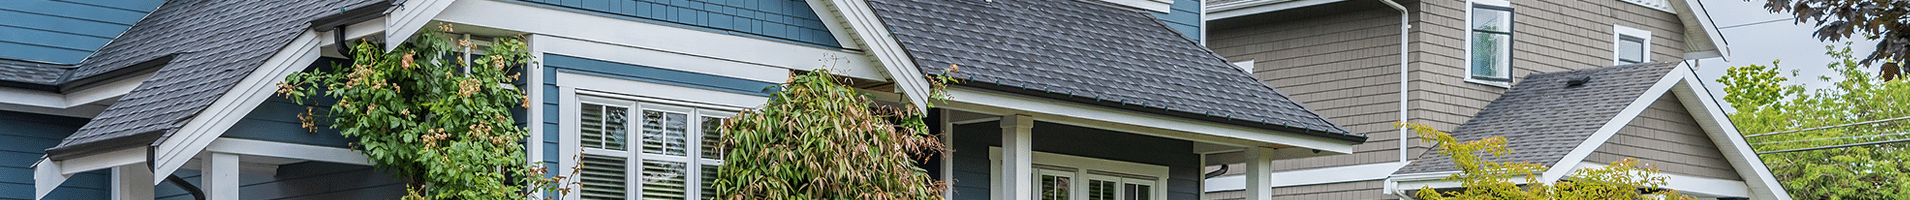 New Smyrna Beach FL Gutter Repairs and Replacement